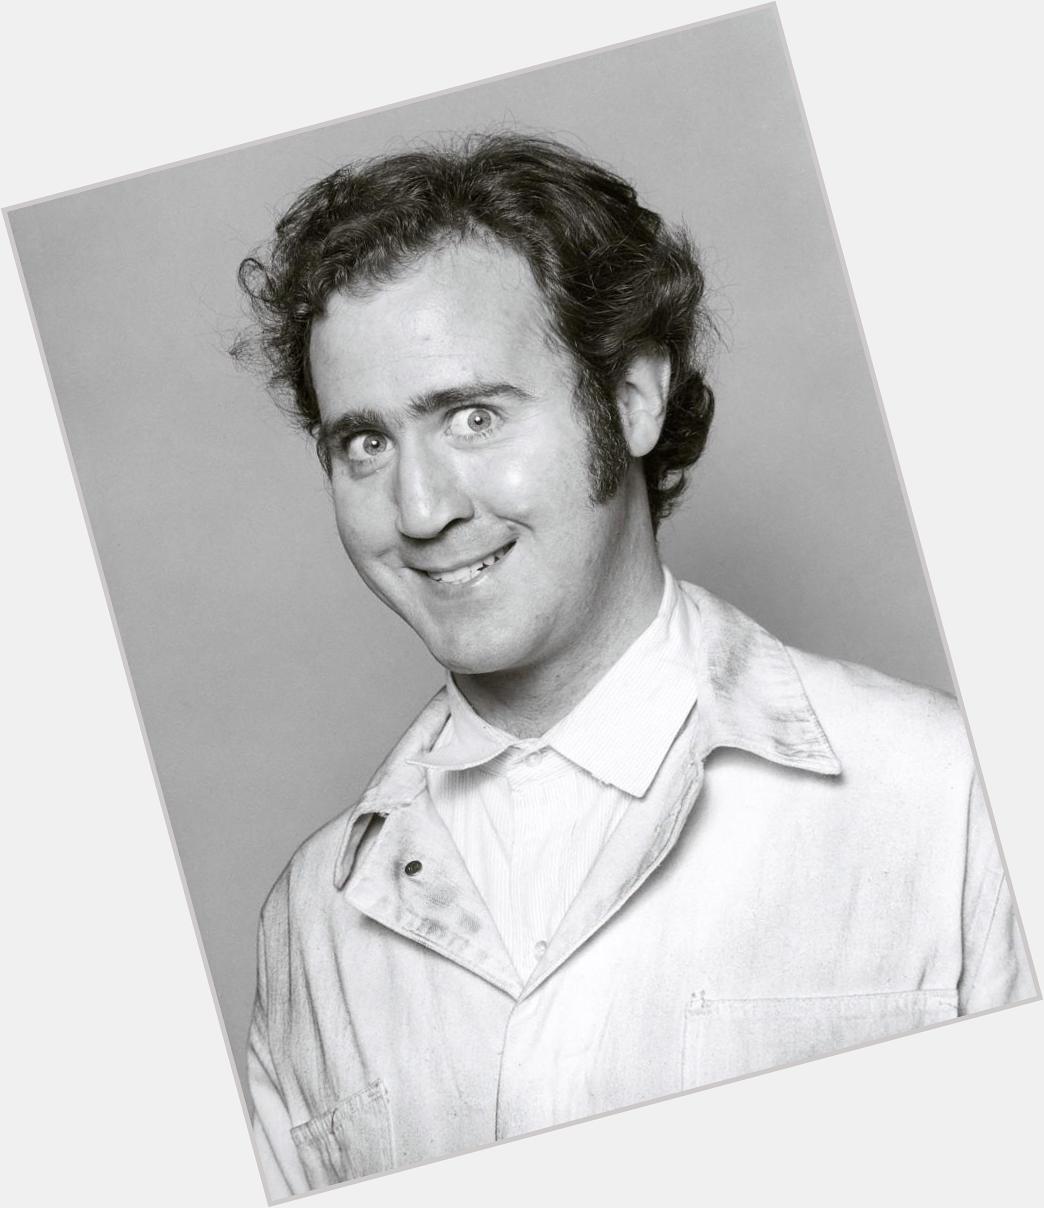 \"No, I\m song and dance man\" - Andy Kaufman. Happy birthday!!! 